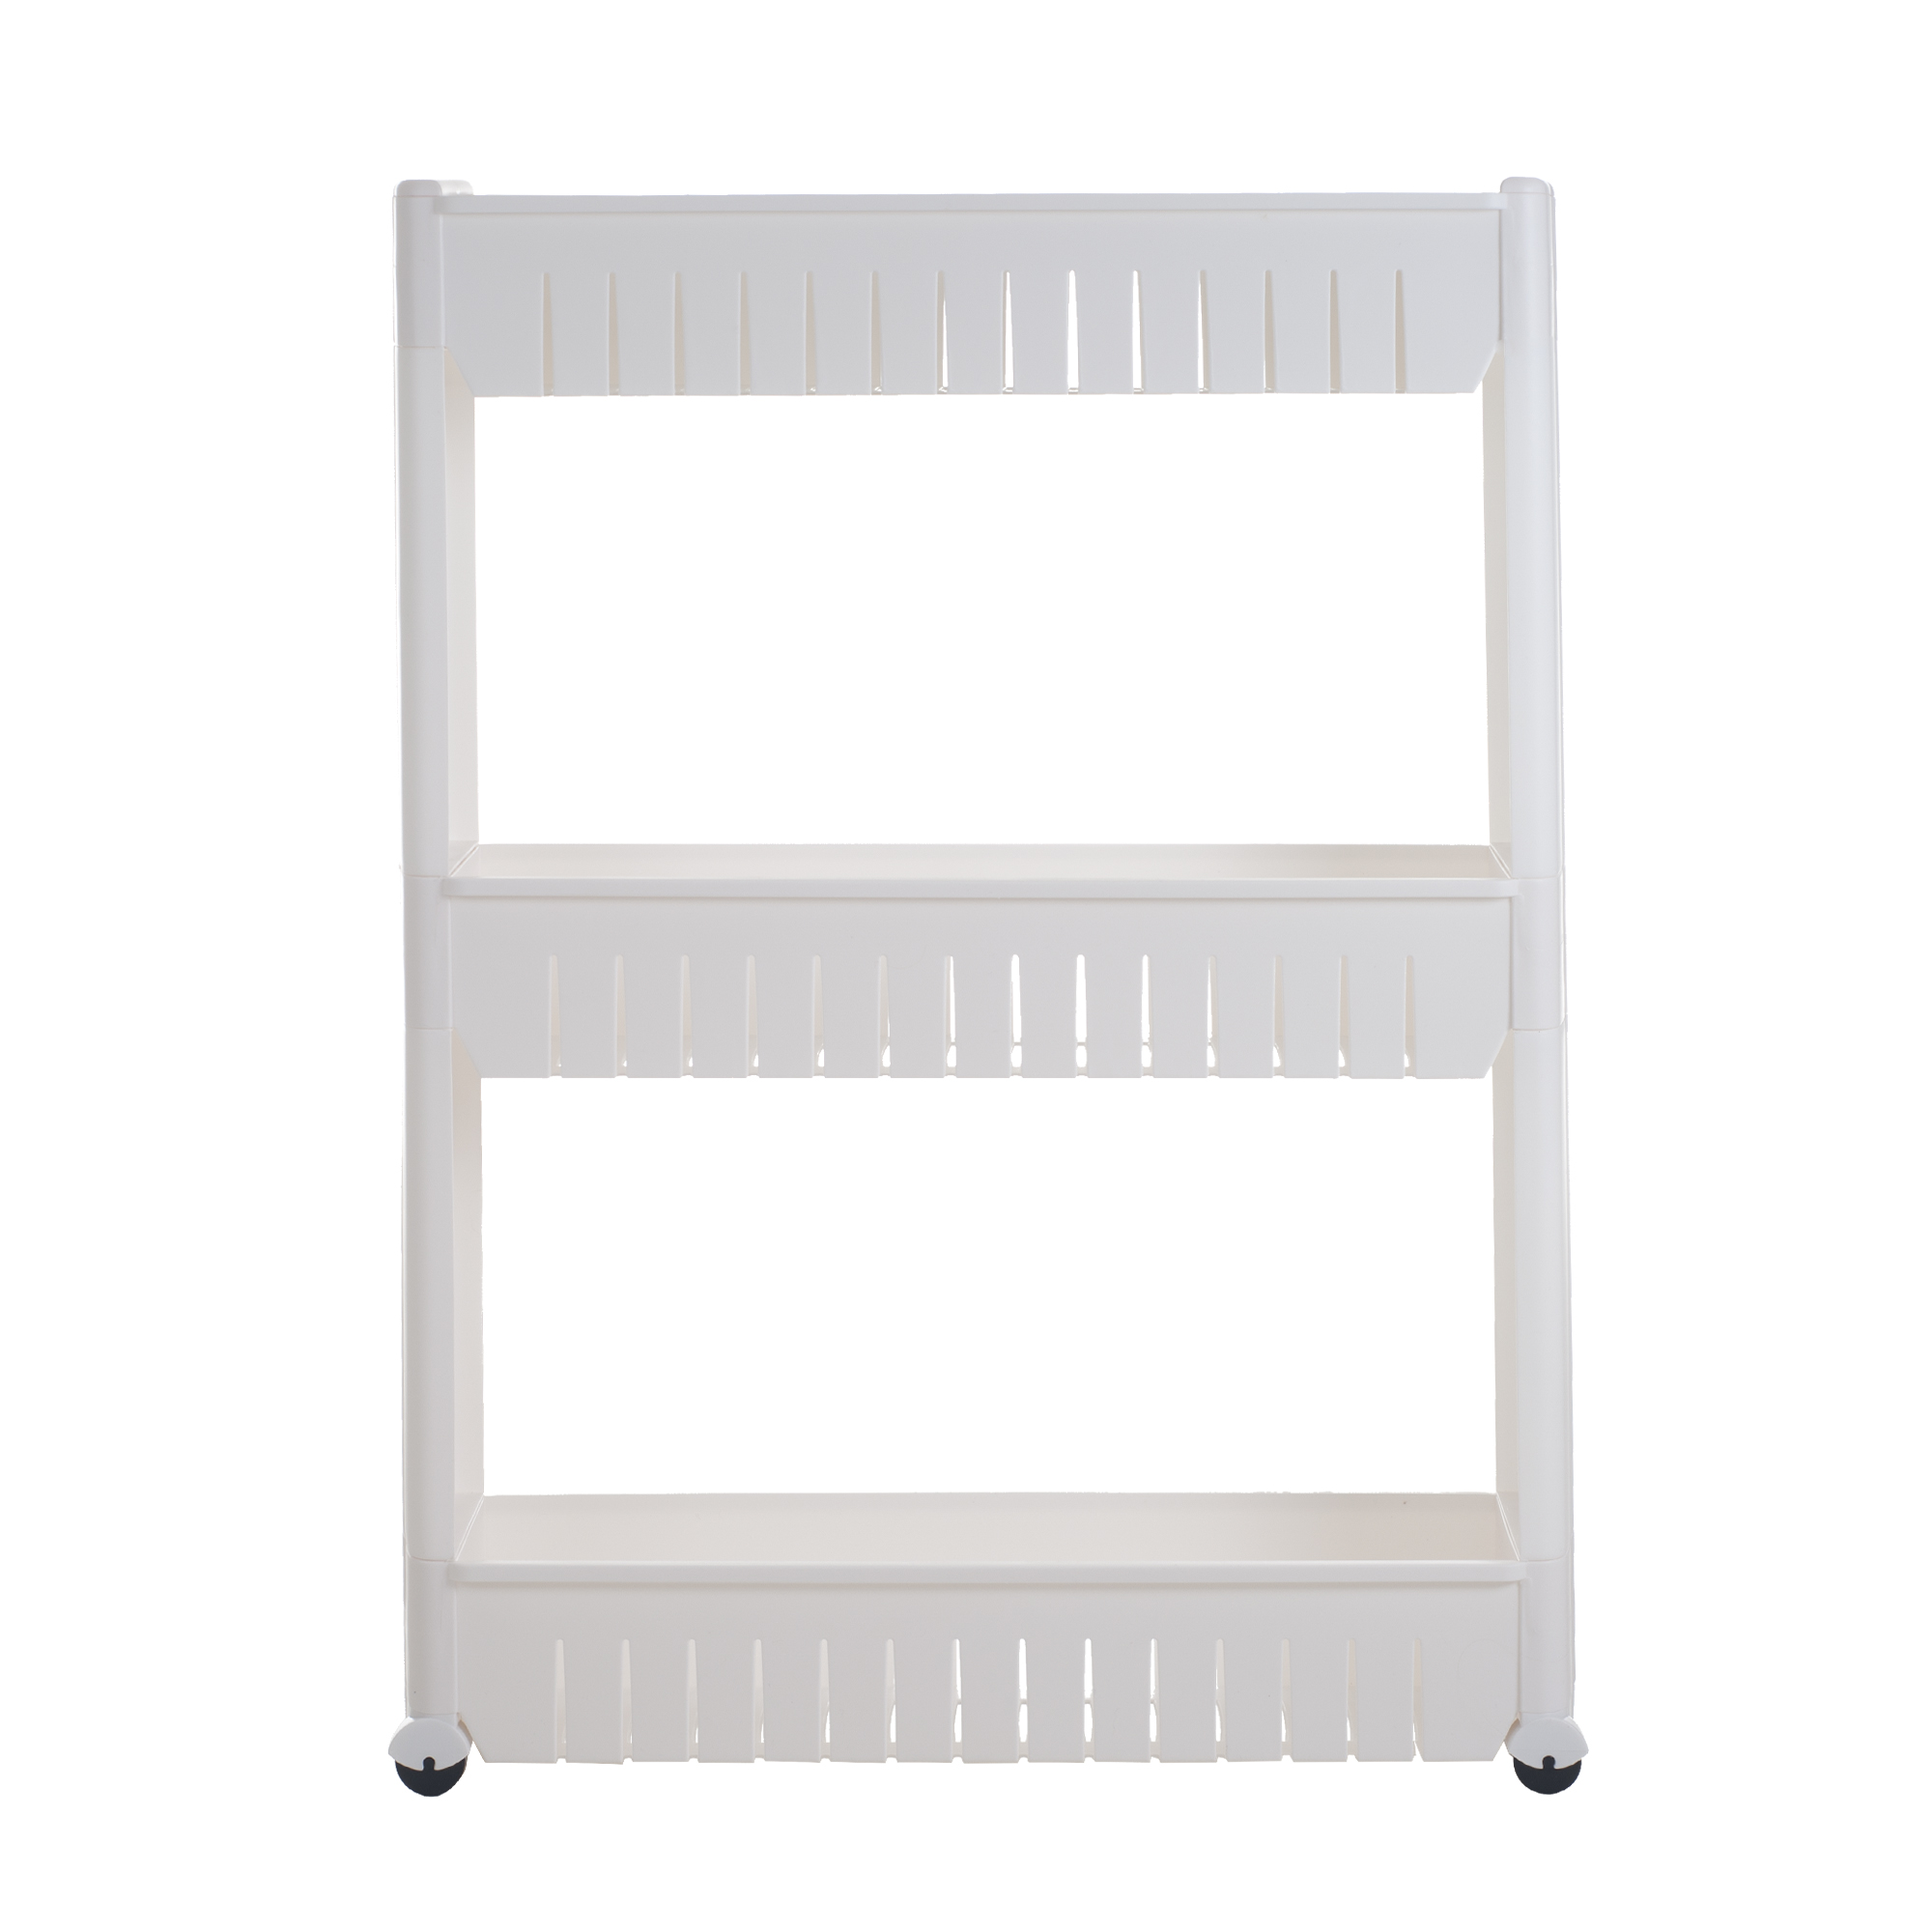 Everyday Home Portable Plastic Shelving Unit Organizer with 3 Large Storage Baskets, up to 100lb capacity - image 3 of 5